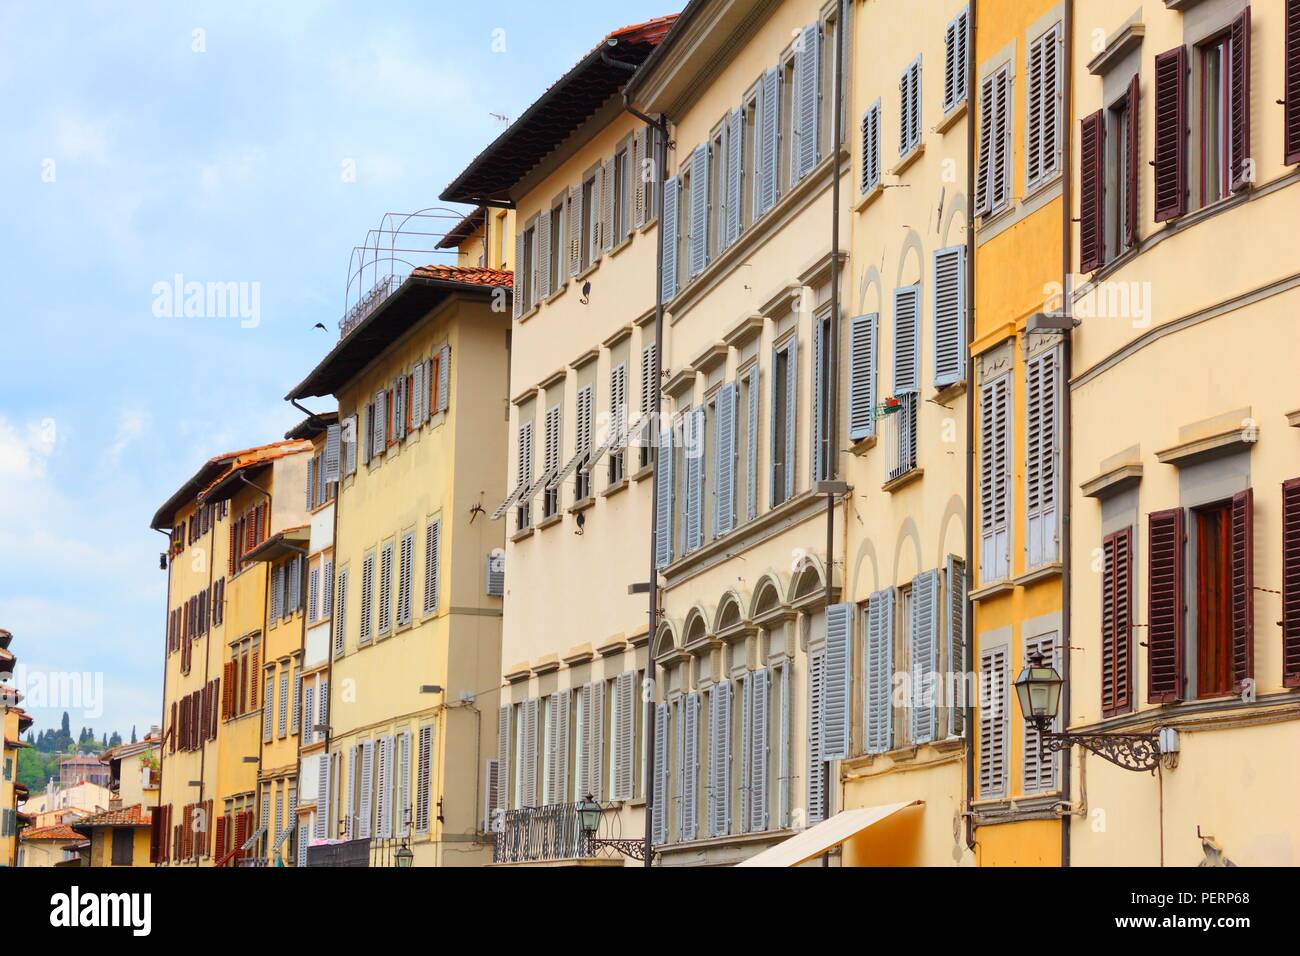 Florence, Italy - typical Mediterranean residential architecture. Apartment buildings. Stock Photo